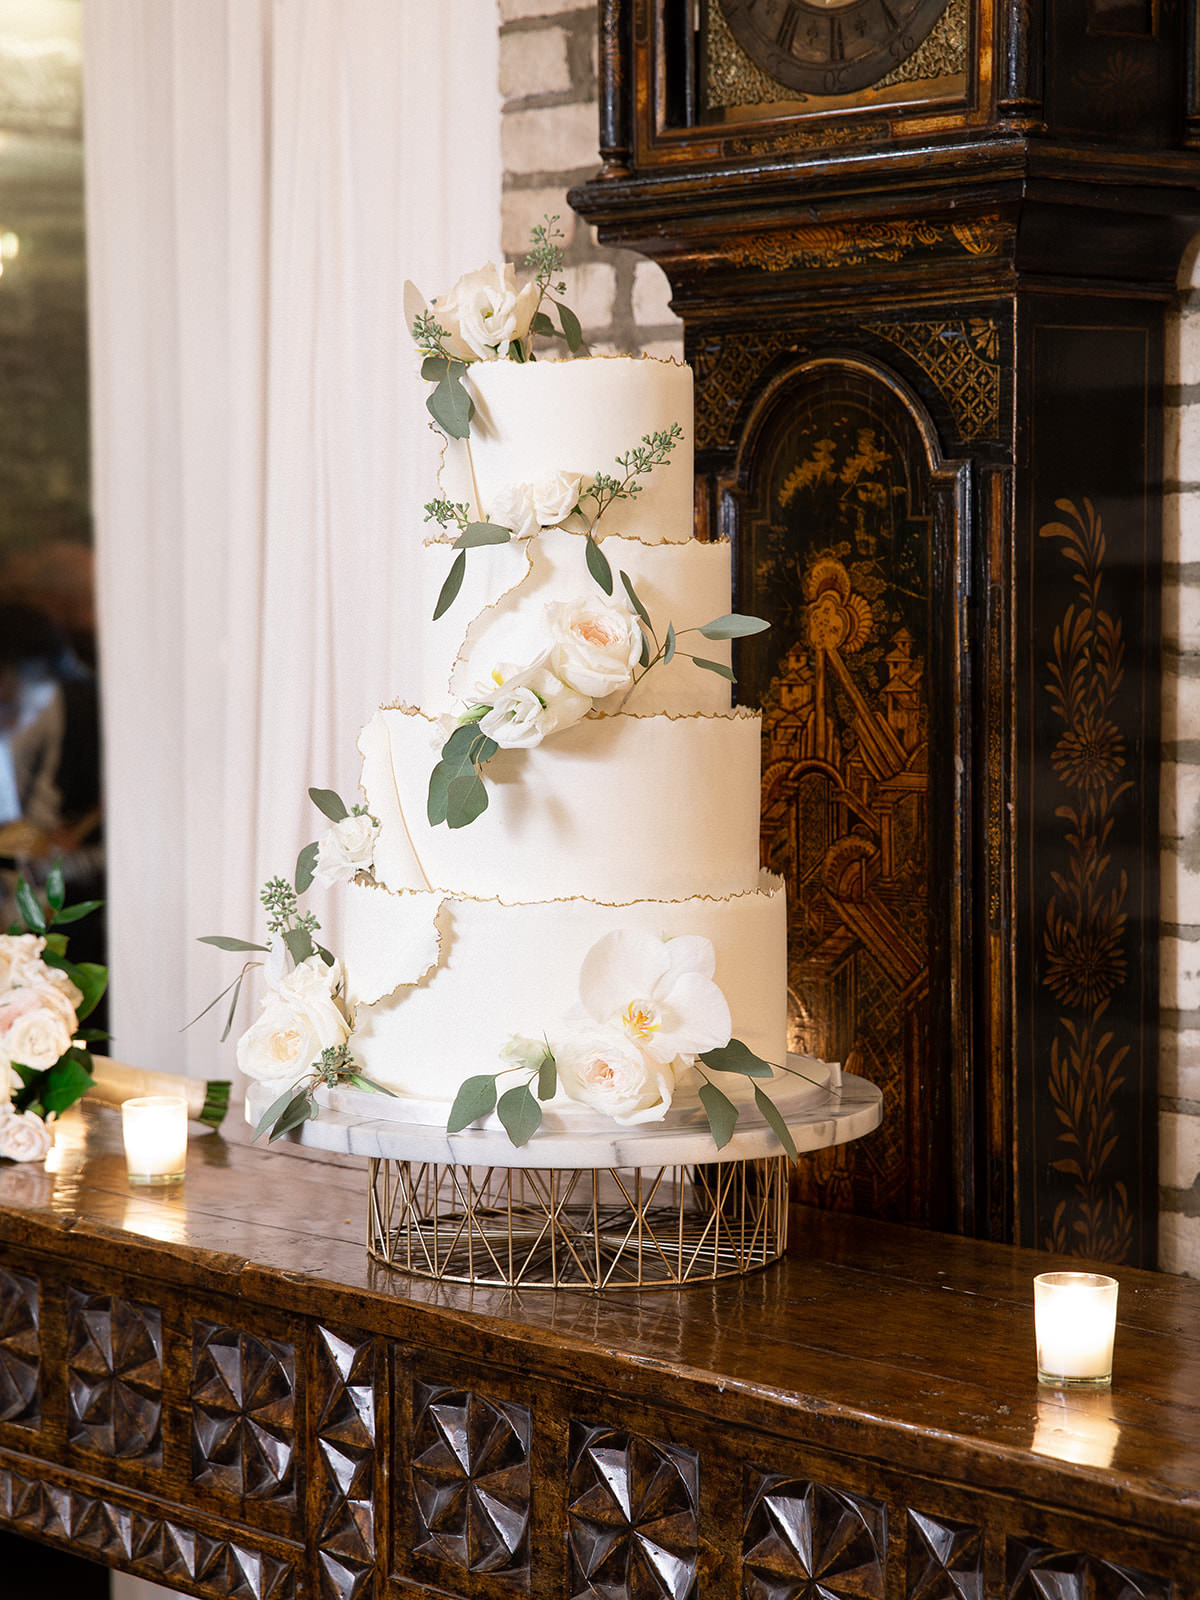 Classic White Four Tier Wedding Cake with White Roses and Orchids